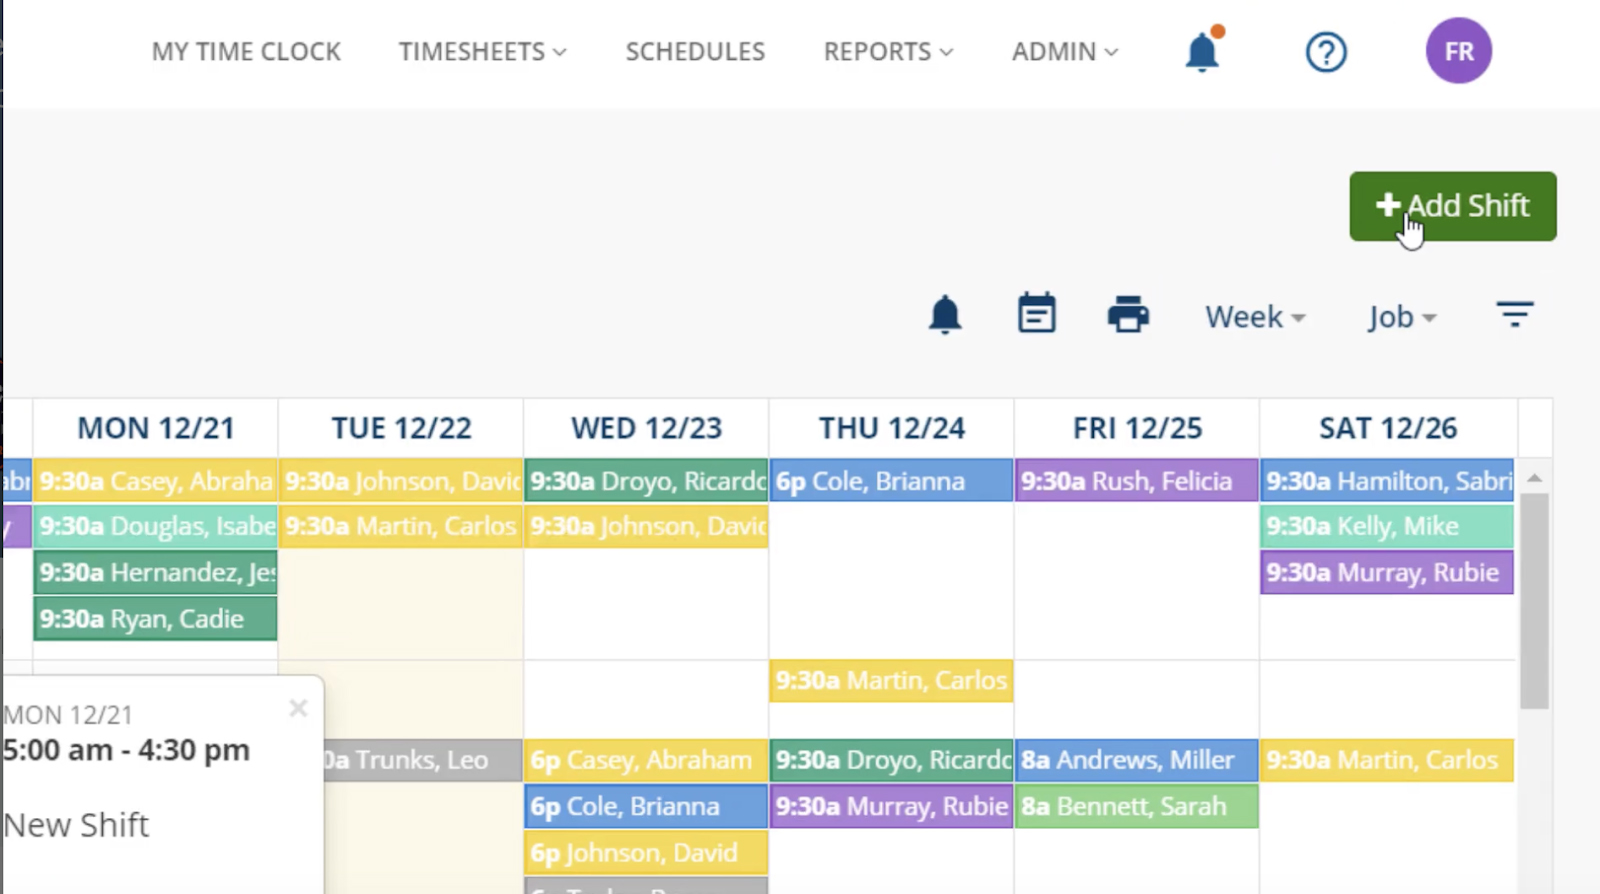 Scheduling software interface showing different schedules and management features.